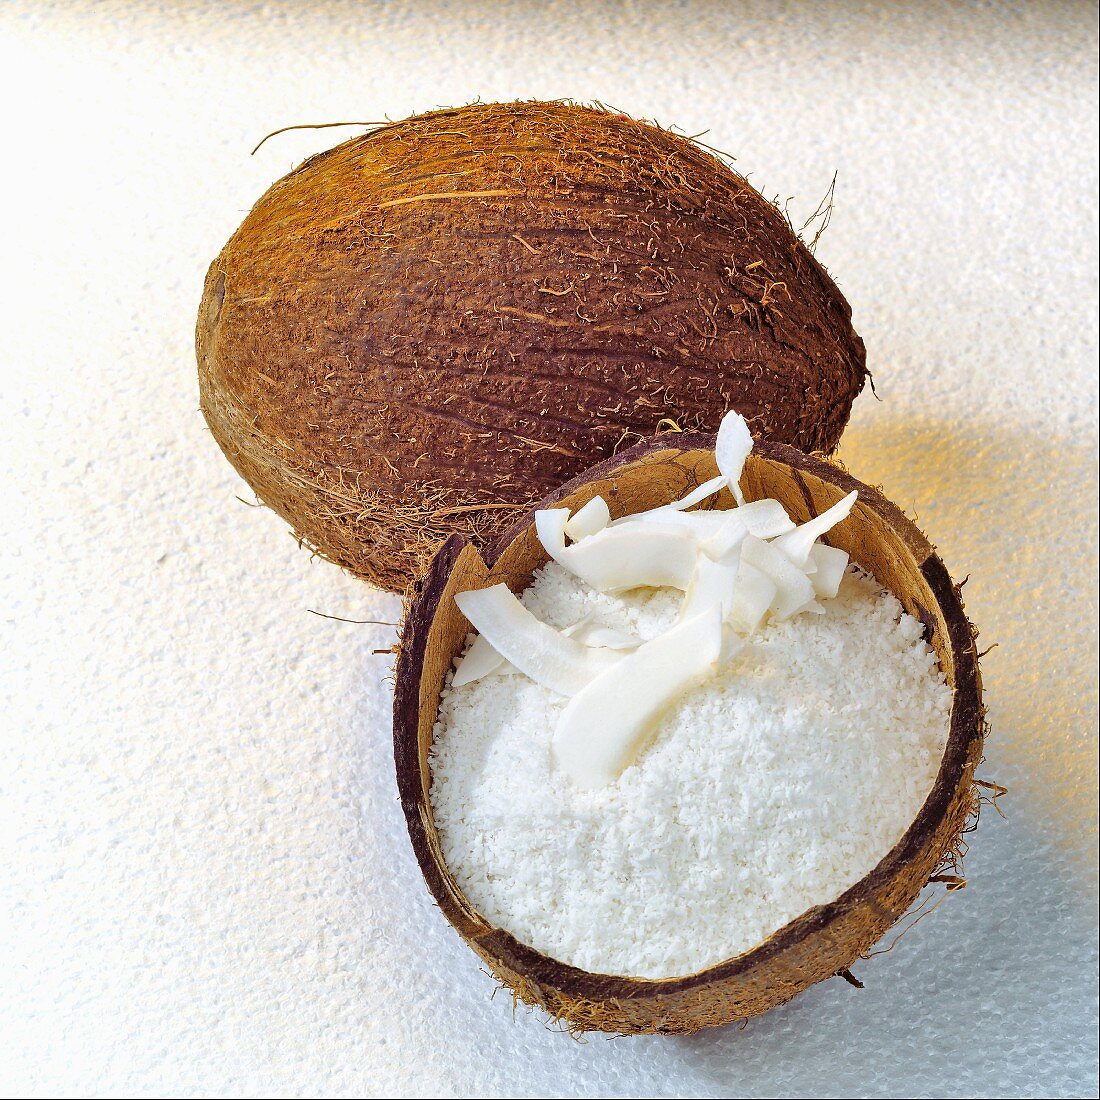 Grated coconut in coconut half and whole coconut